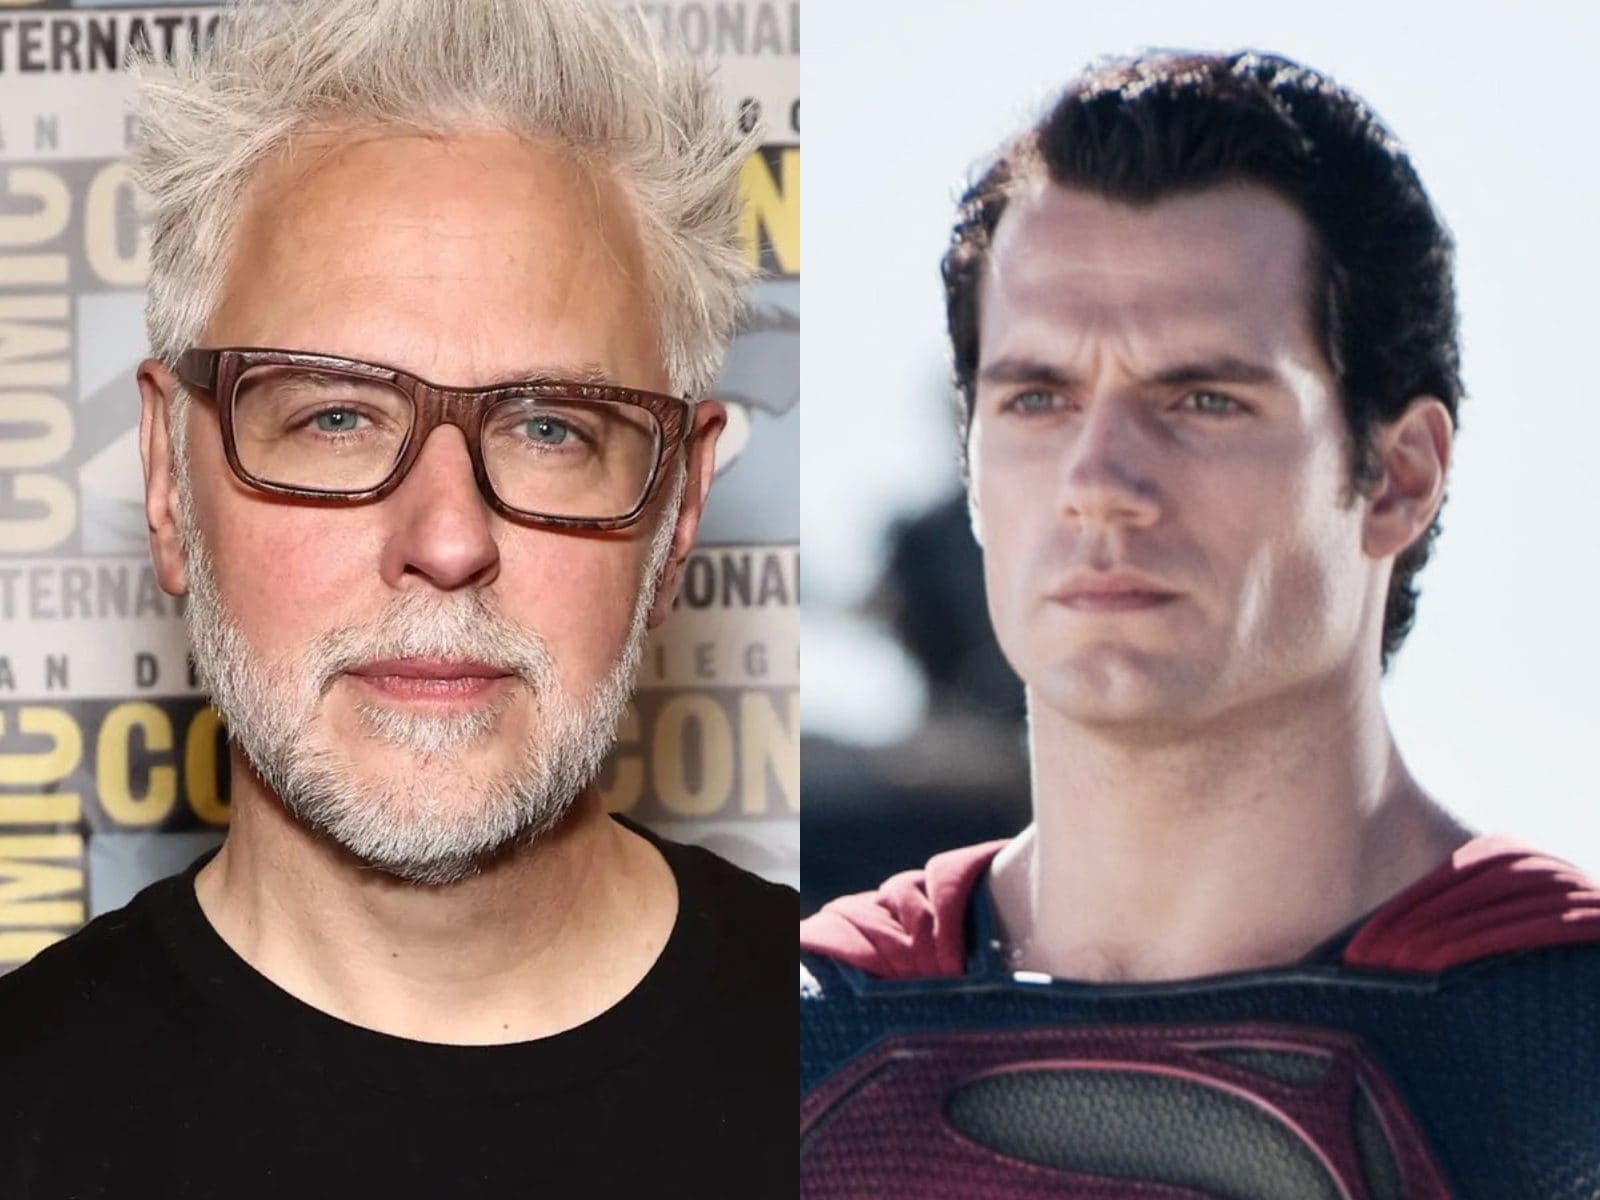 Henry Cavill will not return in the new 'Superman' movie being